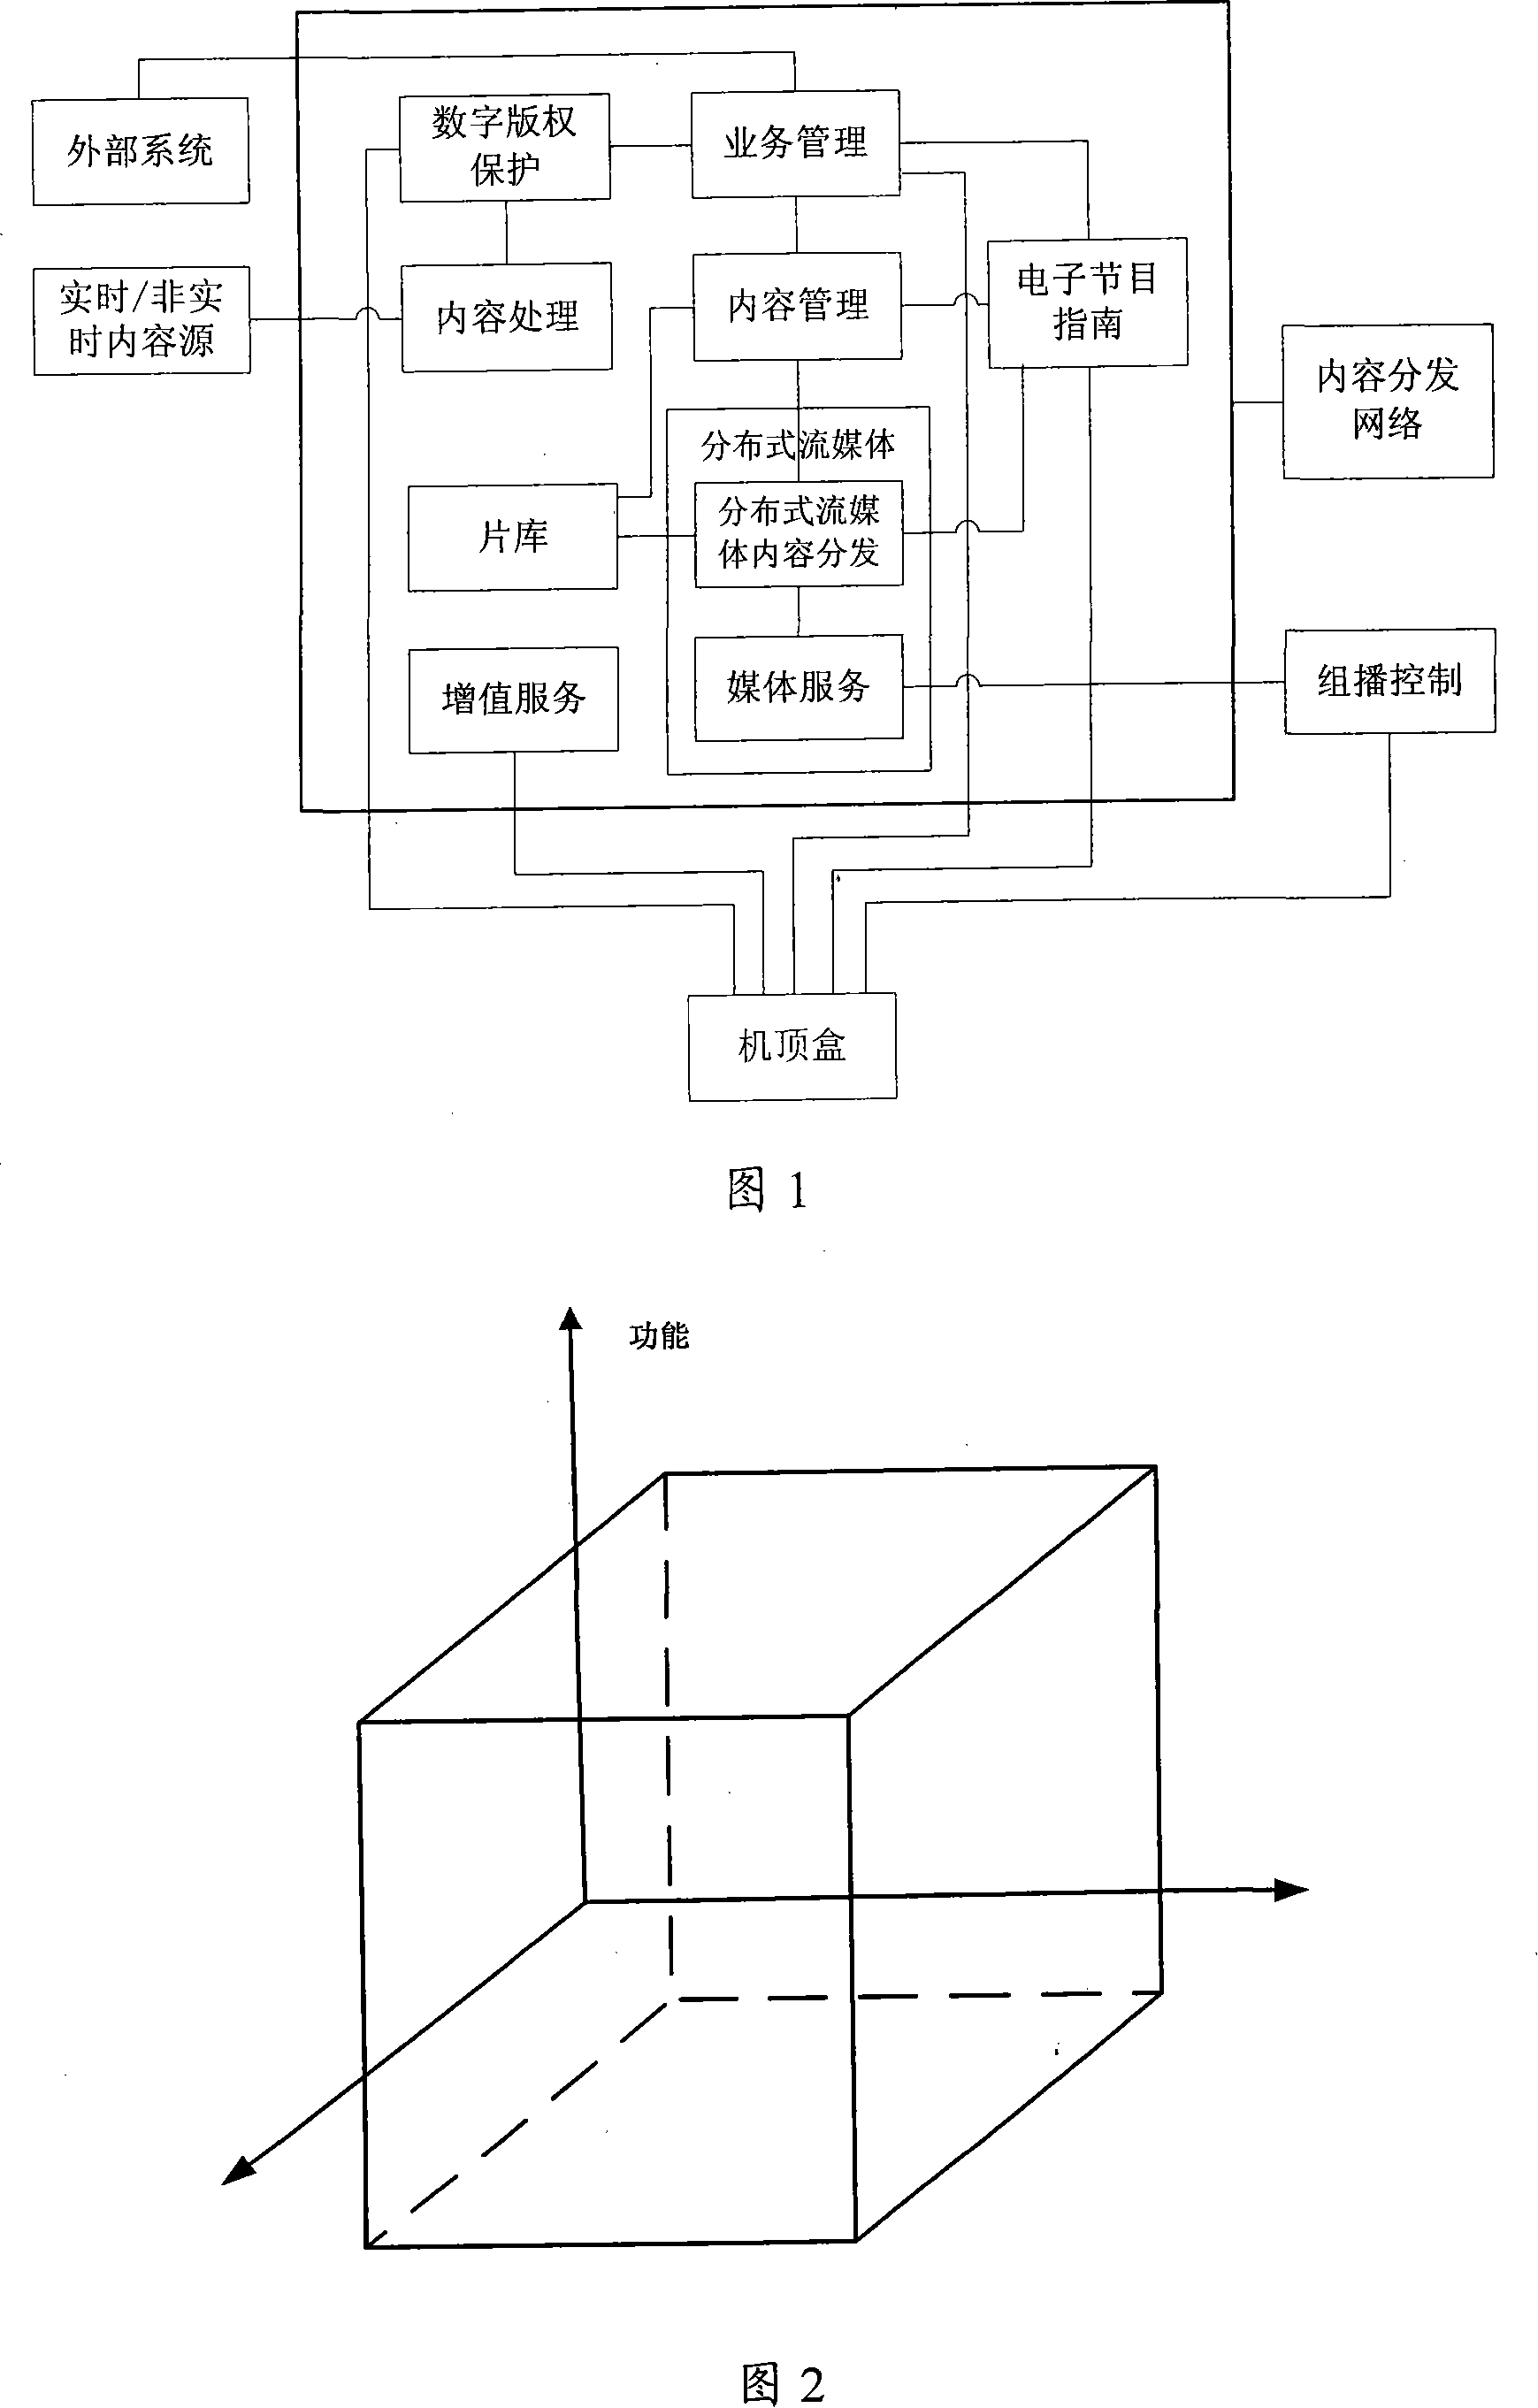 IPTV service management system and method thereof